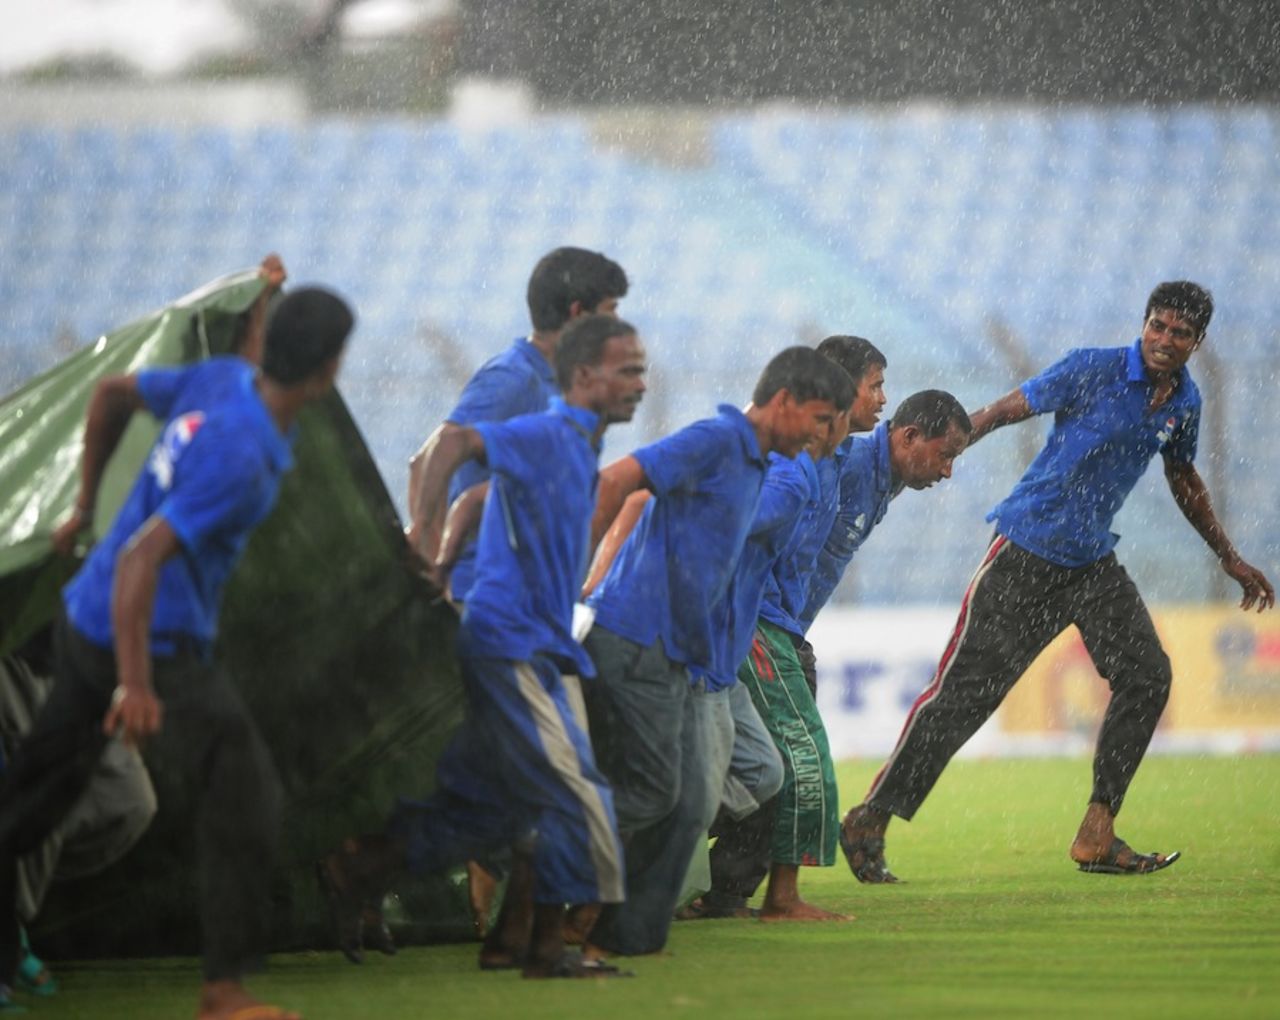 Groundsmen pull the covers on as the rains arrives, Bangladesh v New Zealand, 1st Test, 4th day, Chittagong, October 12, 2013